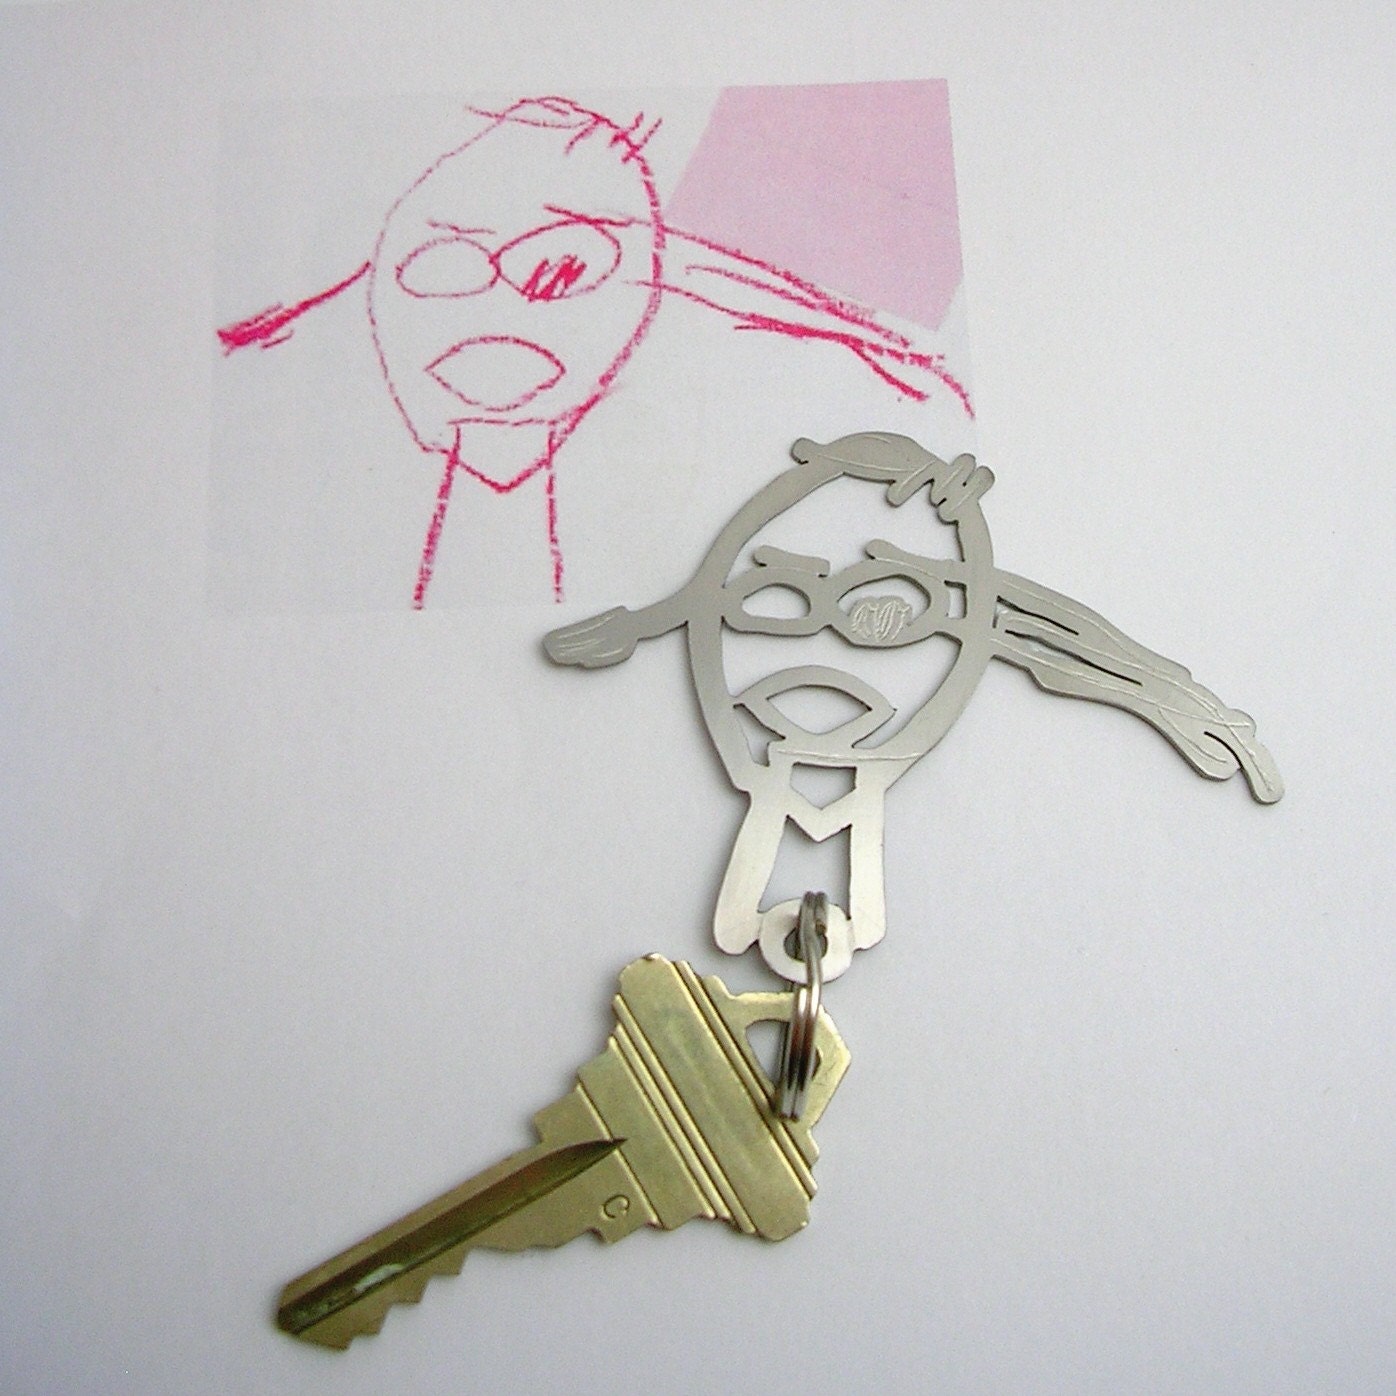 Your child's drawing on key chain for DAD - formiadesign